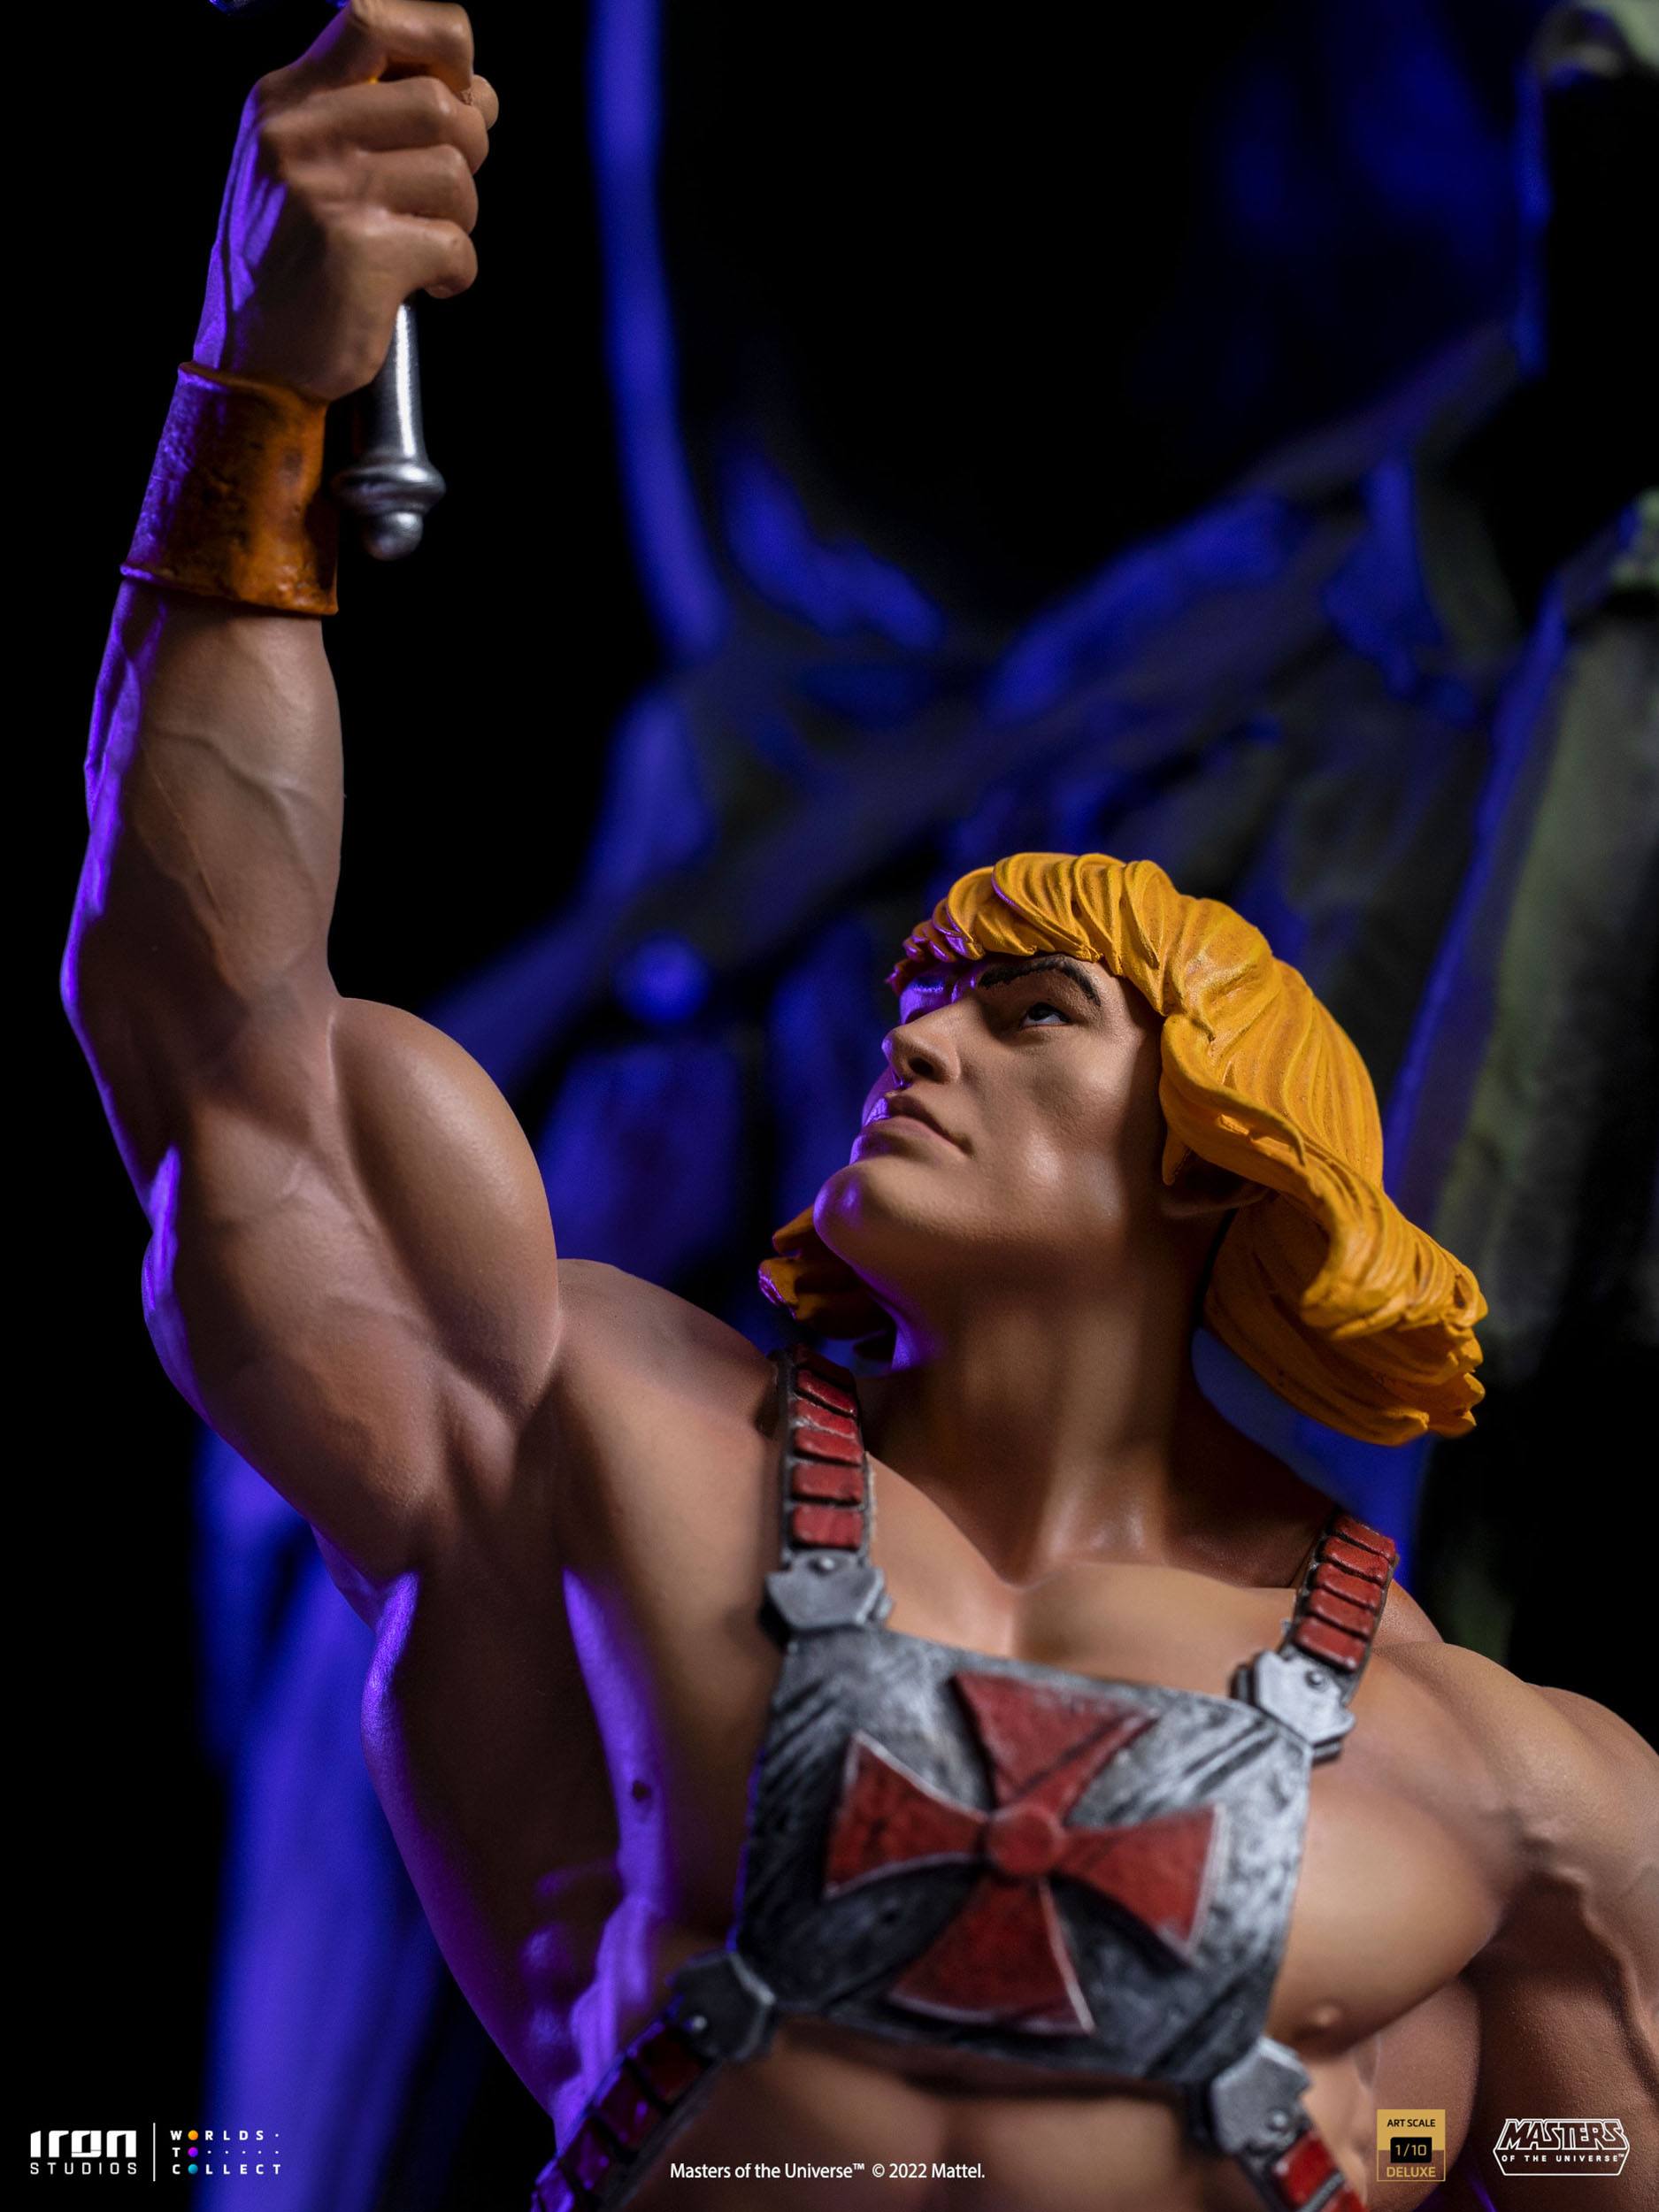 He-Man (Deluxe) - Masters of the Universe - Art Scale 1/10 IS95123 618231951239